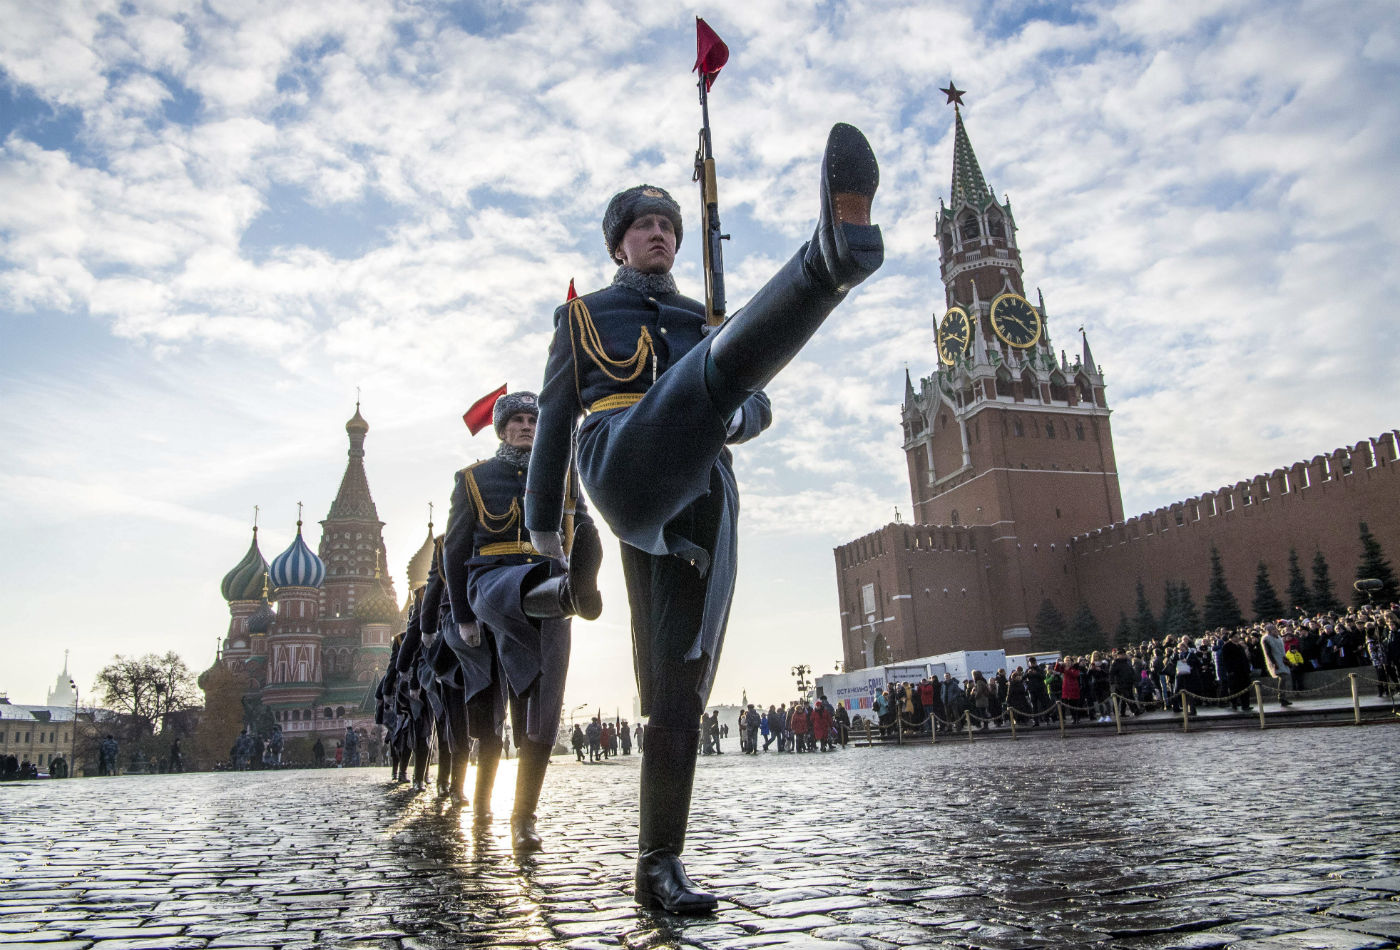 Russian soldiers marching in Red Square